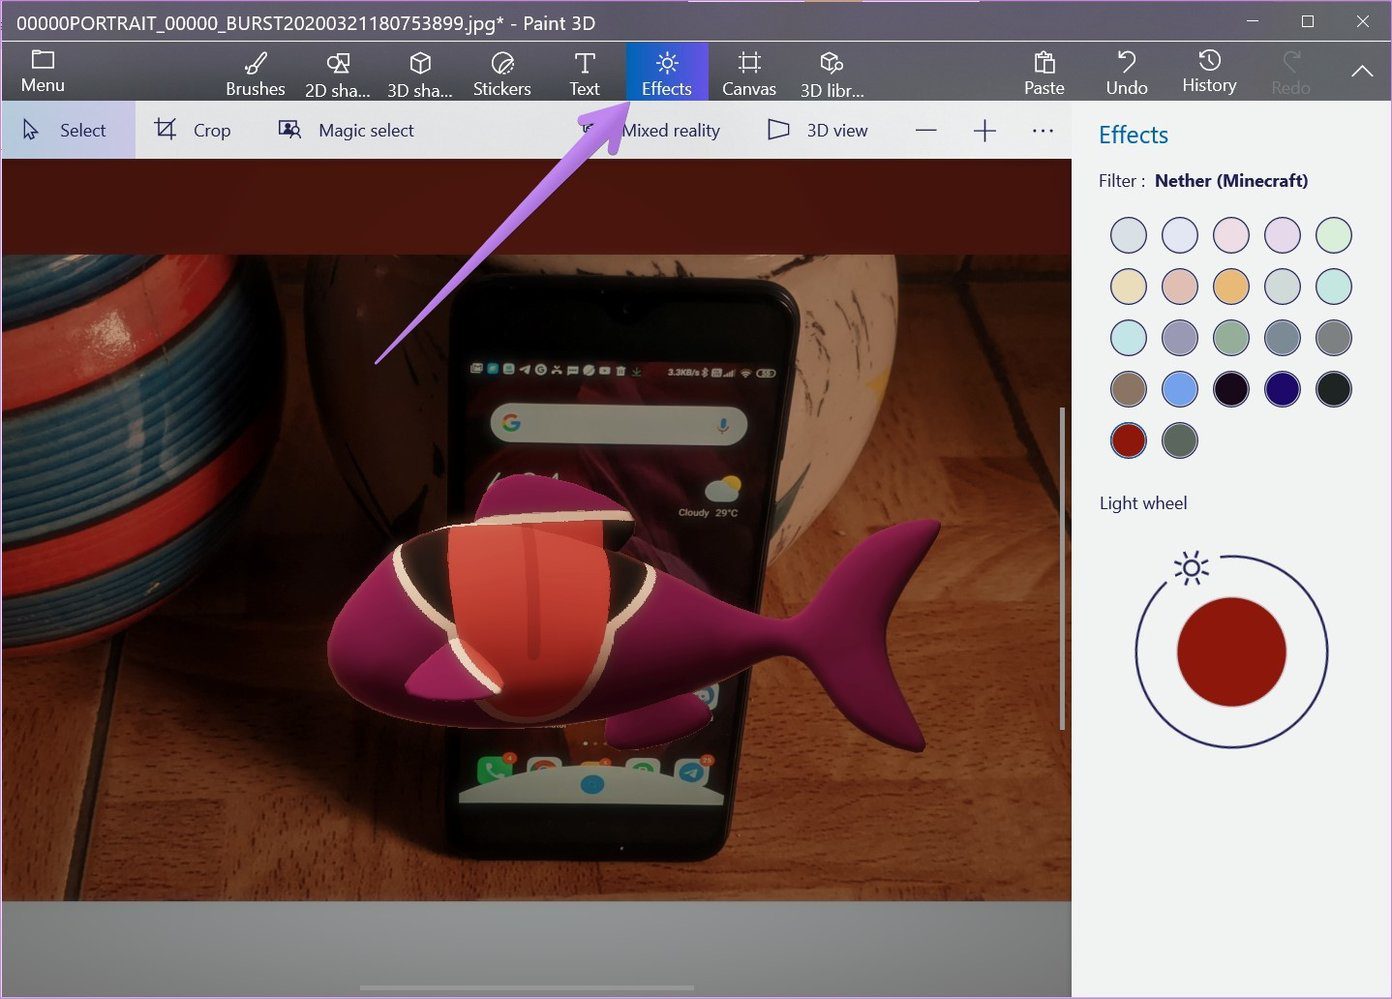 How to use paint 3d to edit photos 19